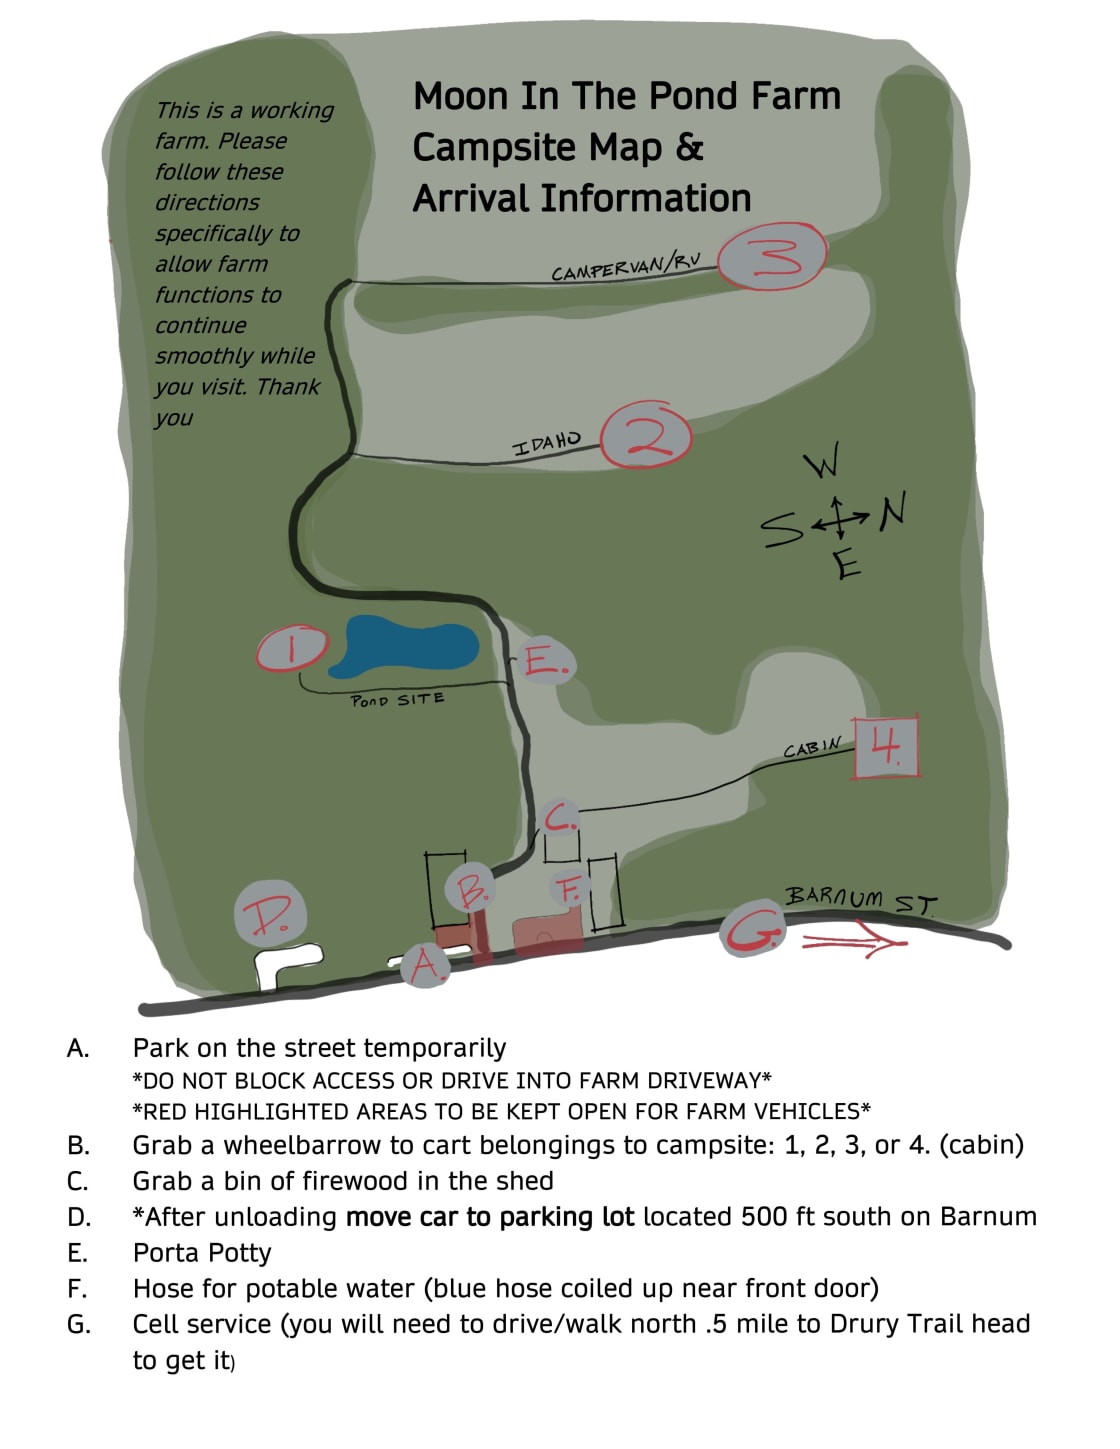 Refer to map for site location and arrival info